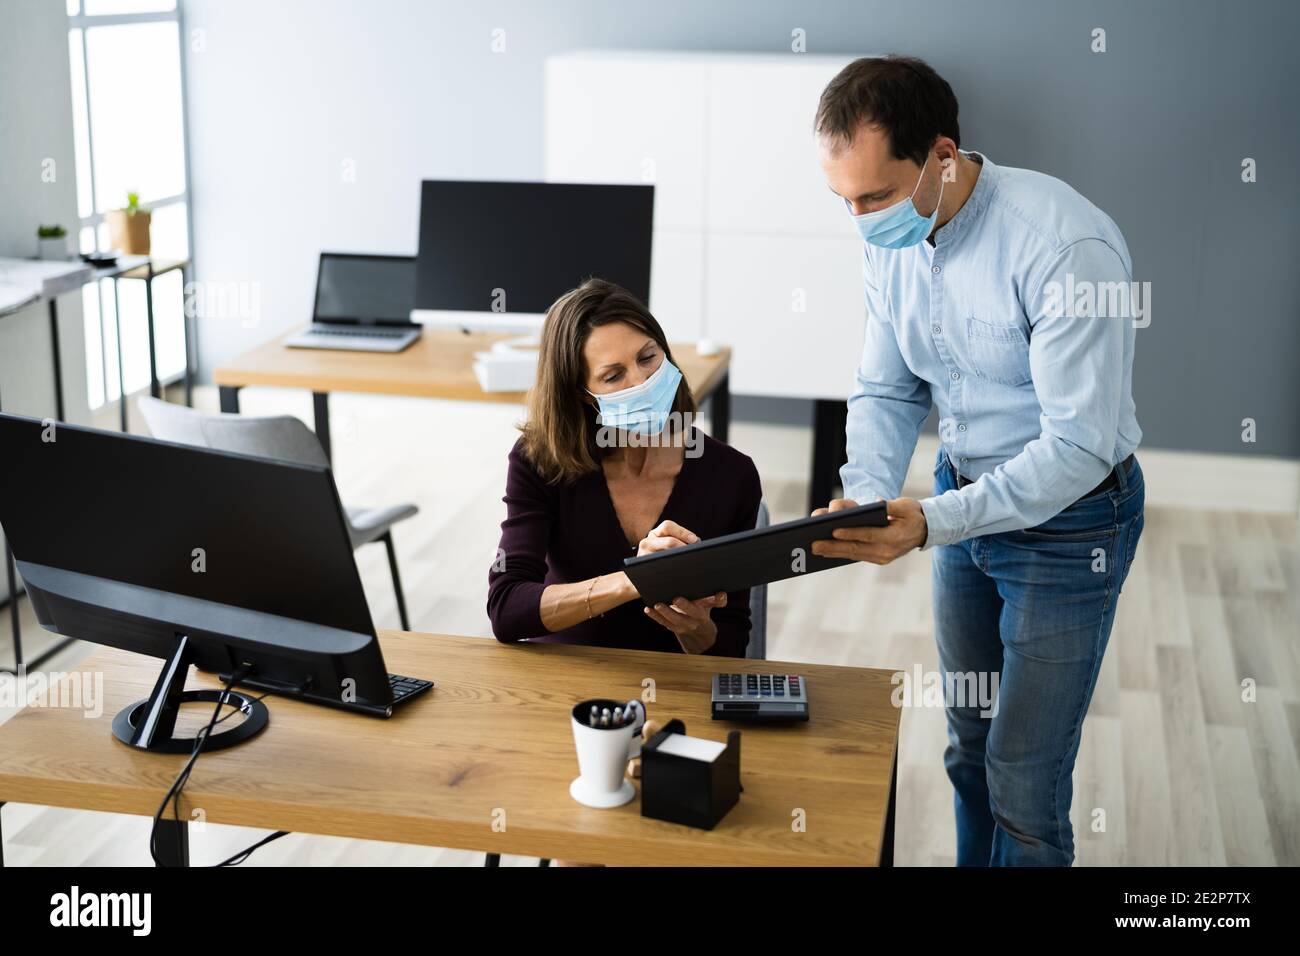 Employee Assistant Training Wearing Face Mask In Office Stock Photo